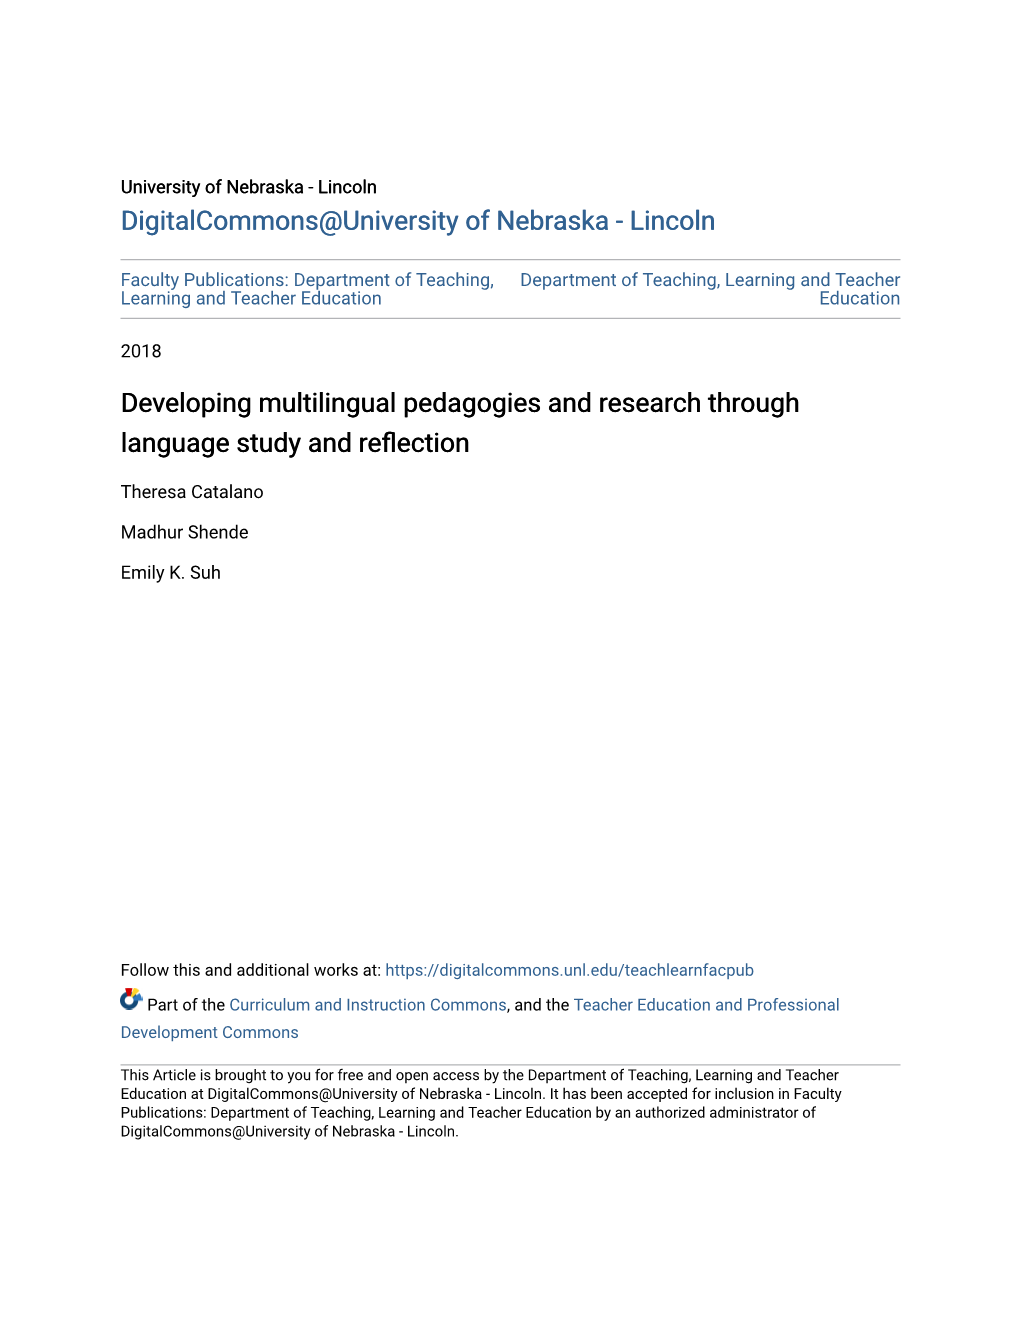 Developing Multilingual Pedagogies and Research Through Language Study and Reflection